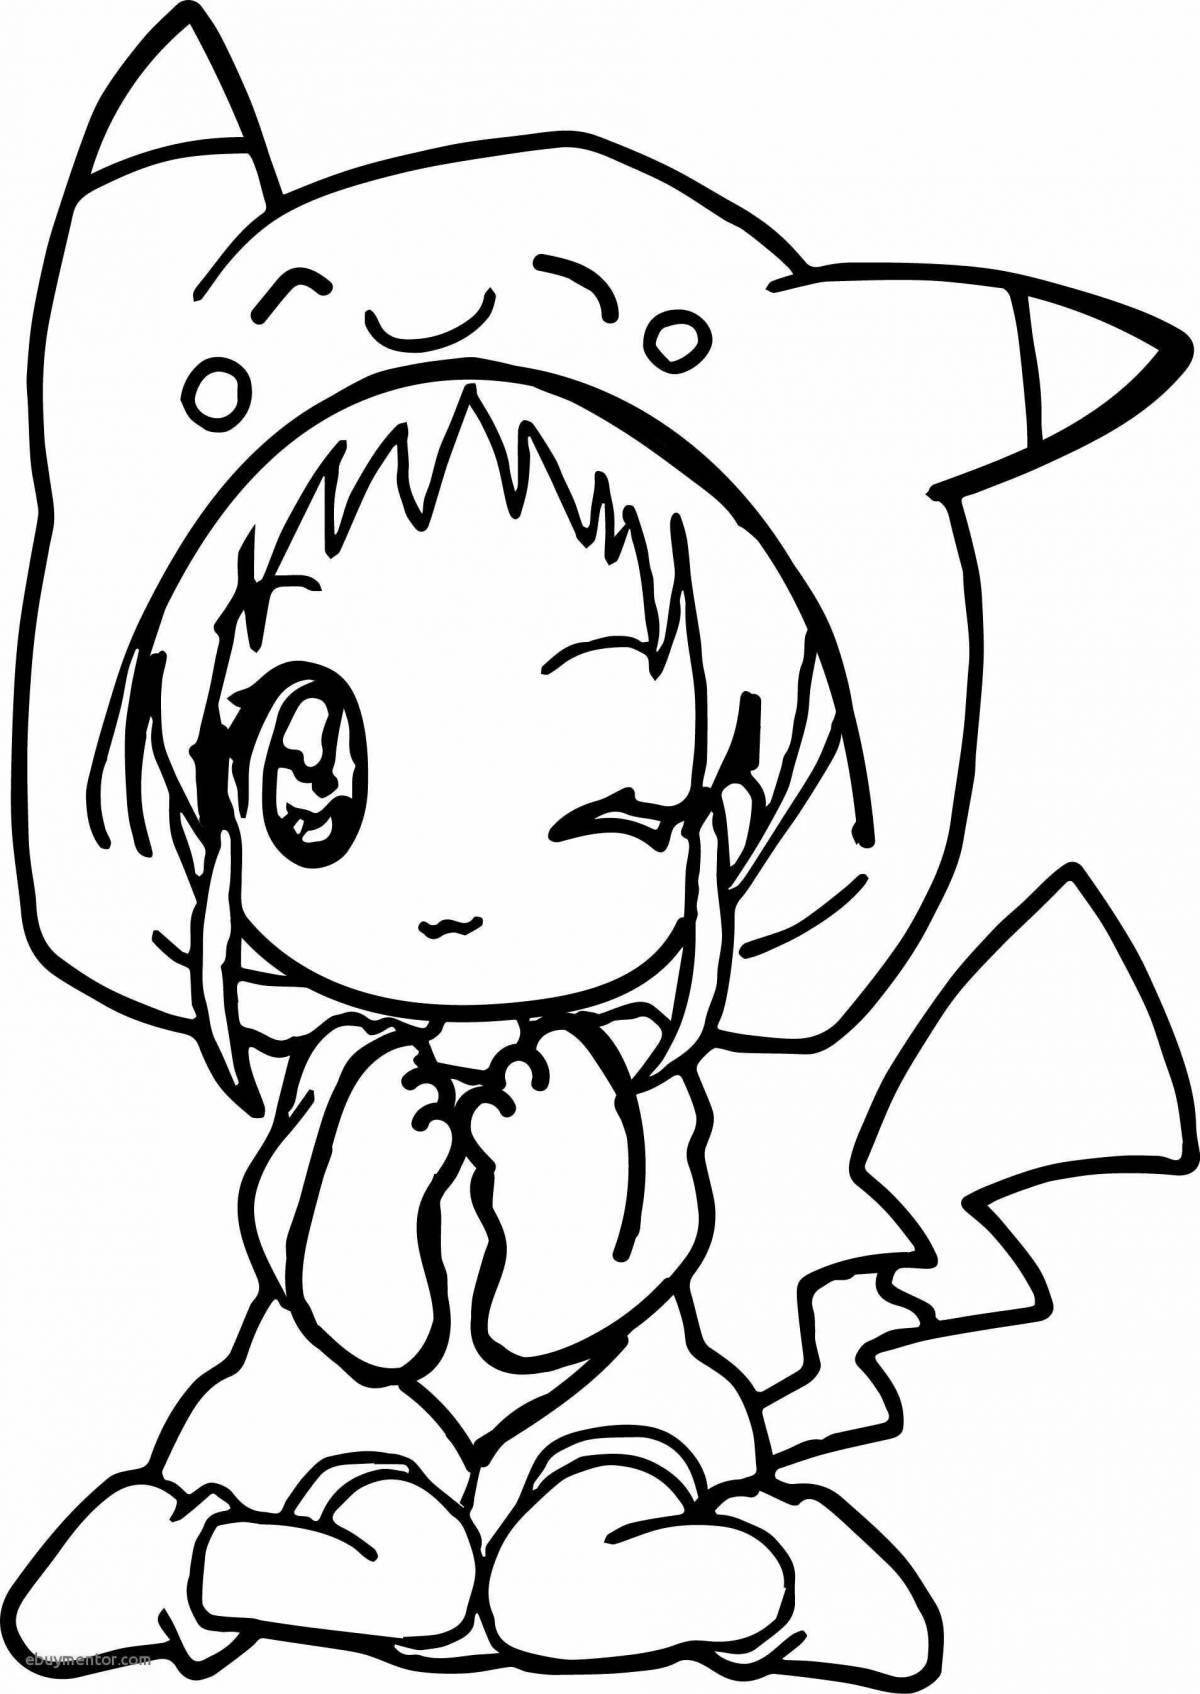 Playtime coloring page pikachu girl